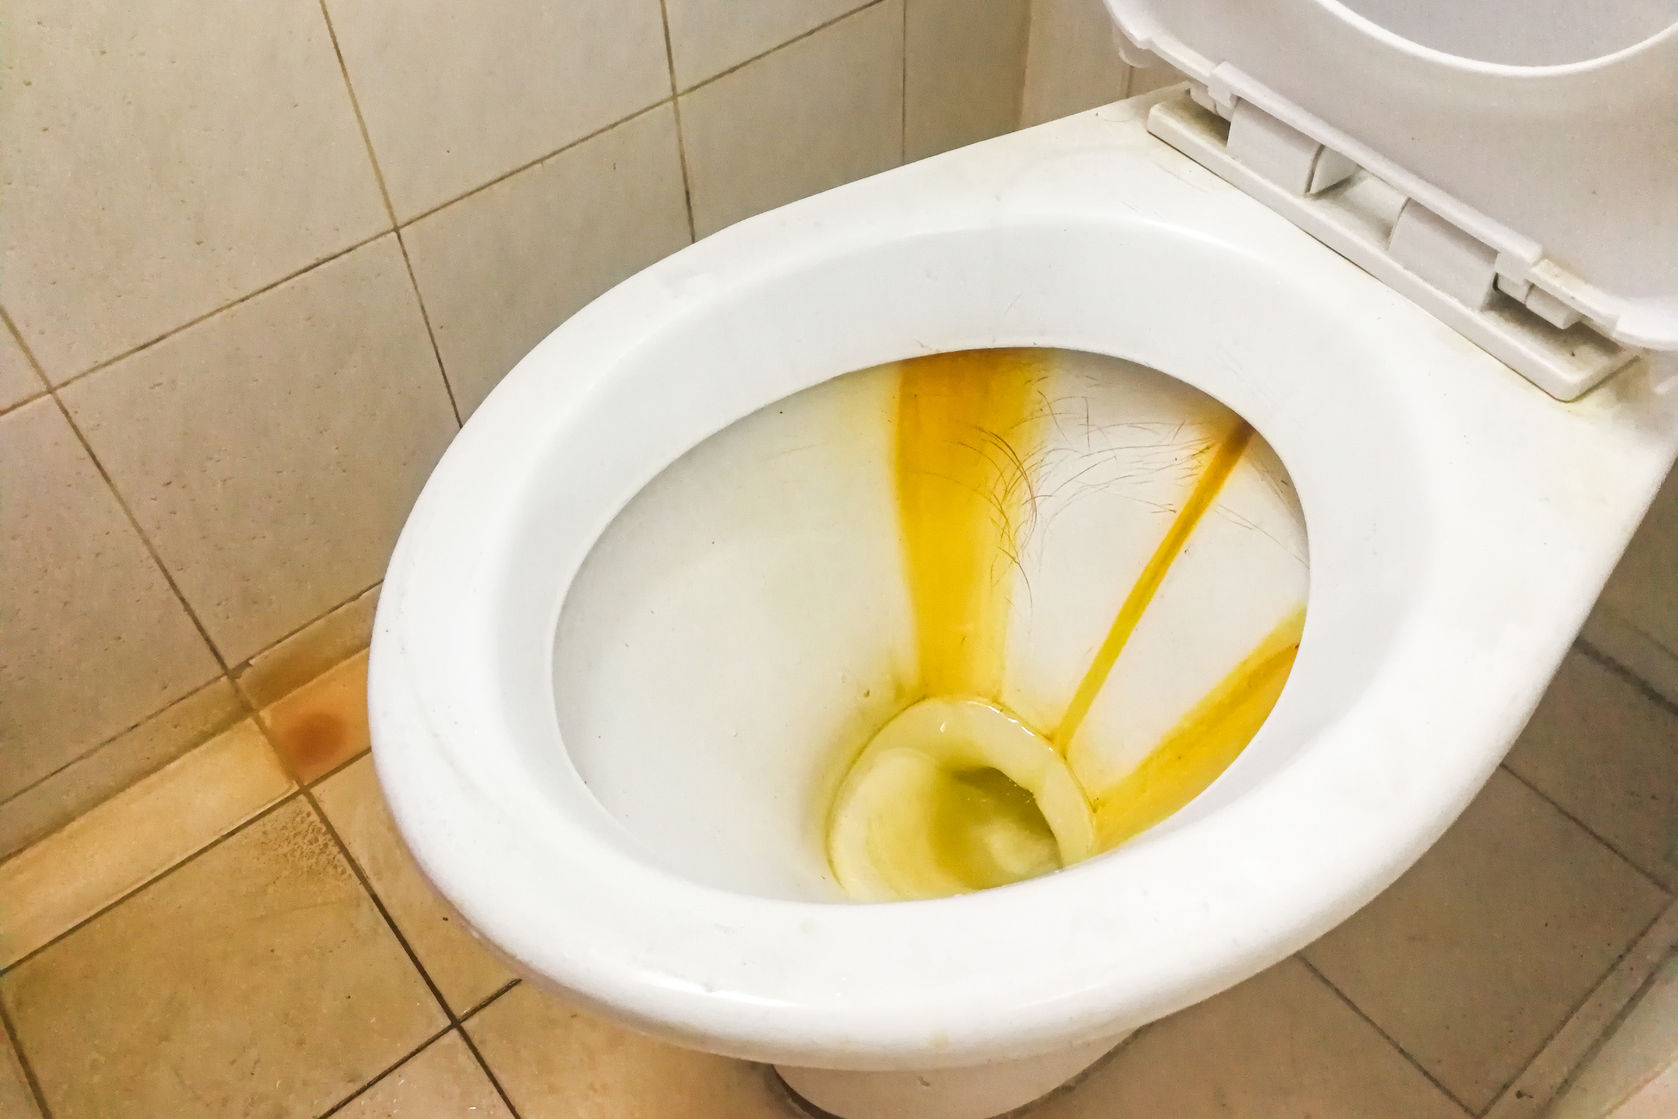 A dirty toilet bowl with rust stains